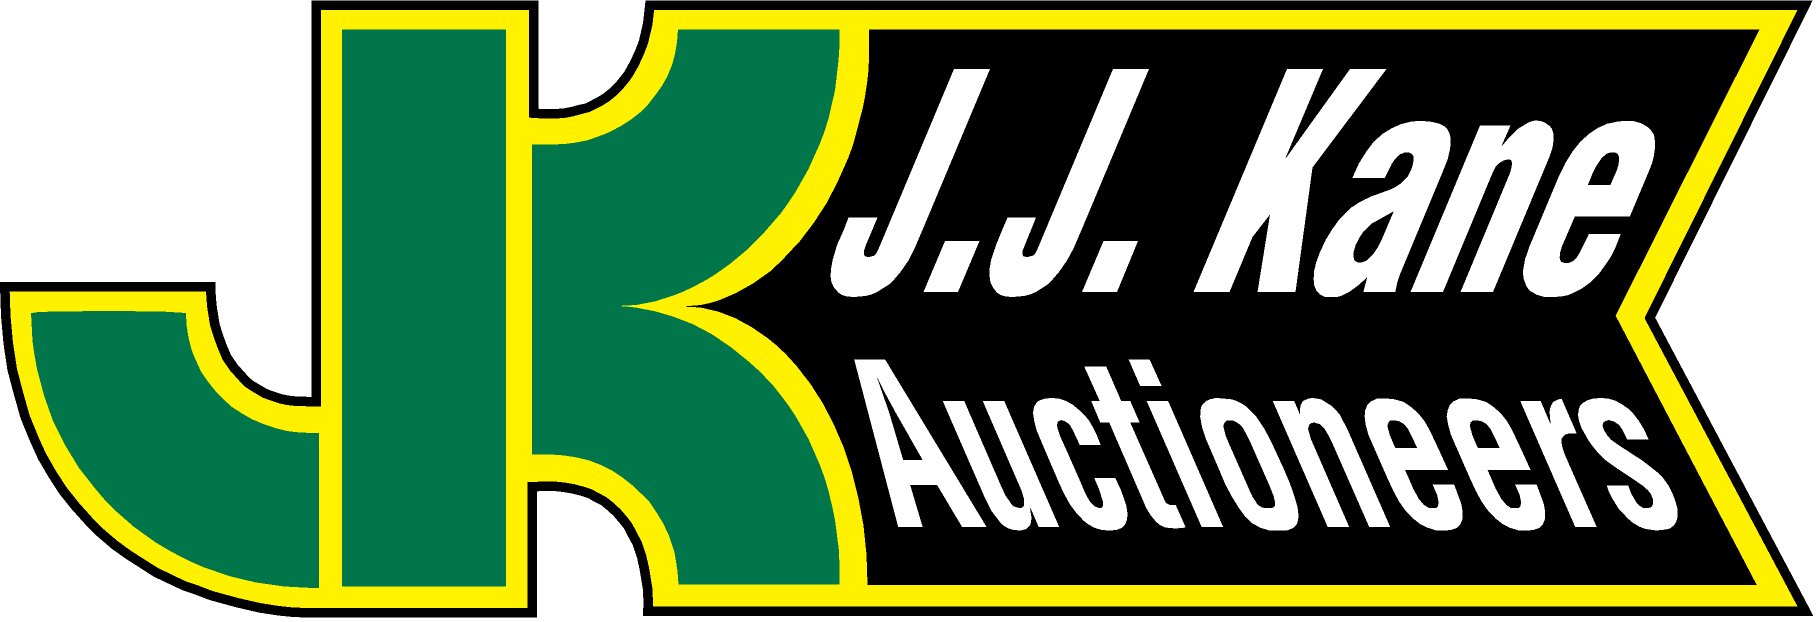 Used car and truck public auction